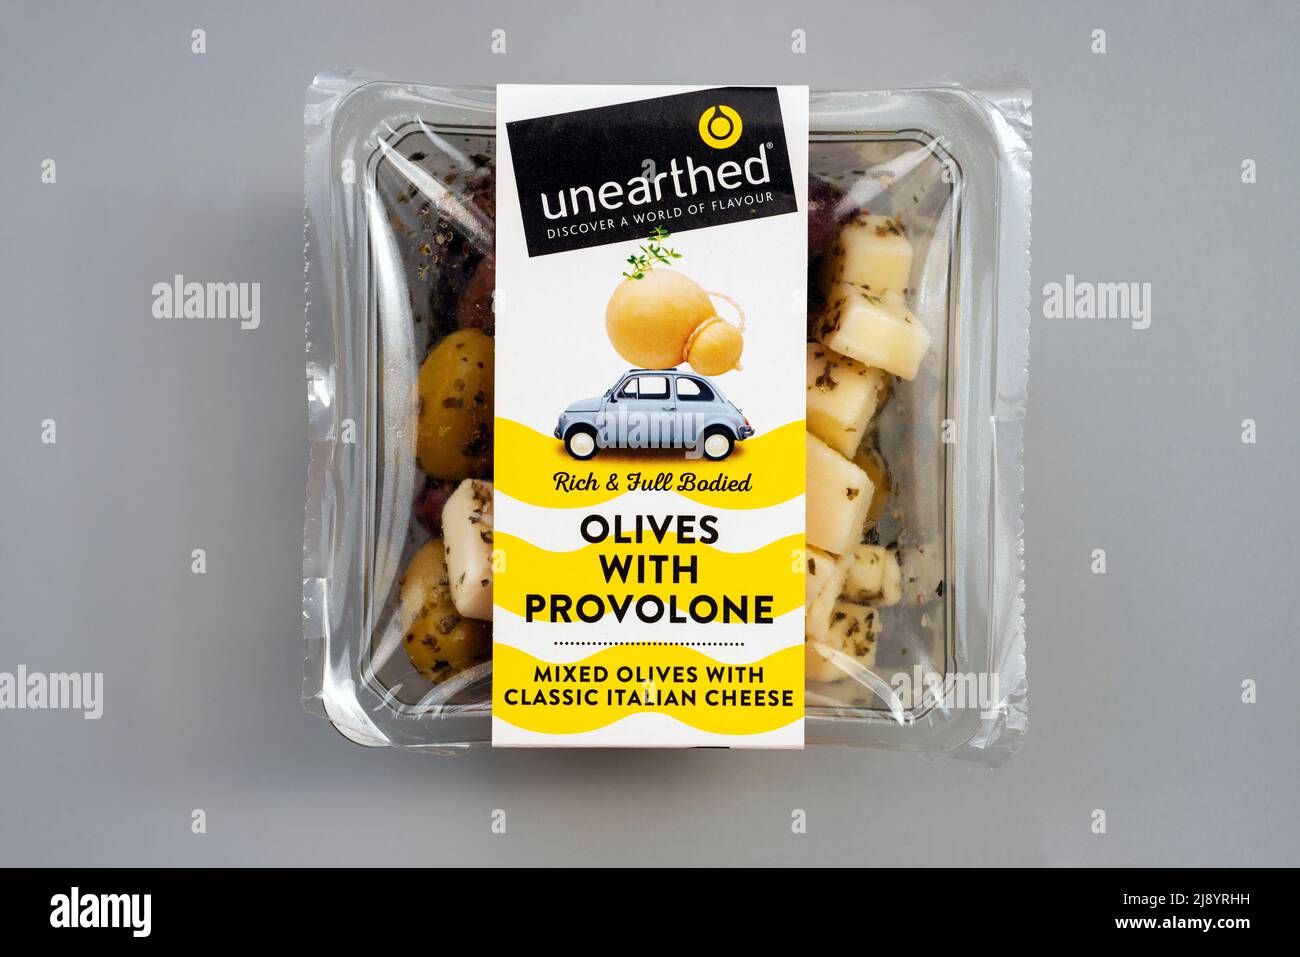 Unearthed olives with provolone with classic Italian cheese Stock Photo